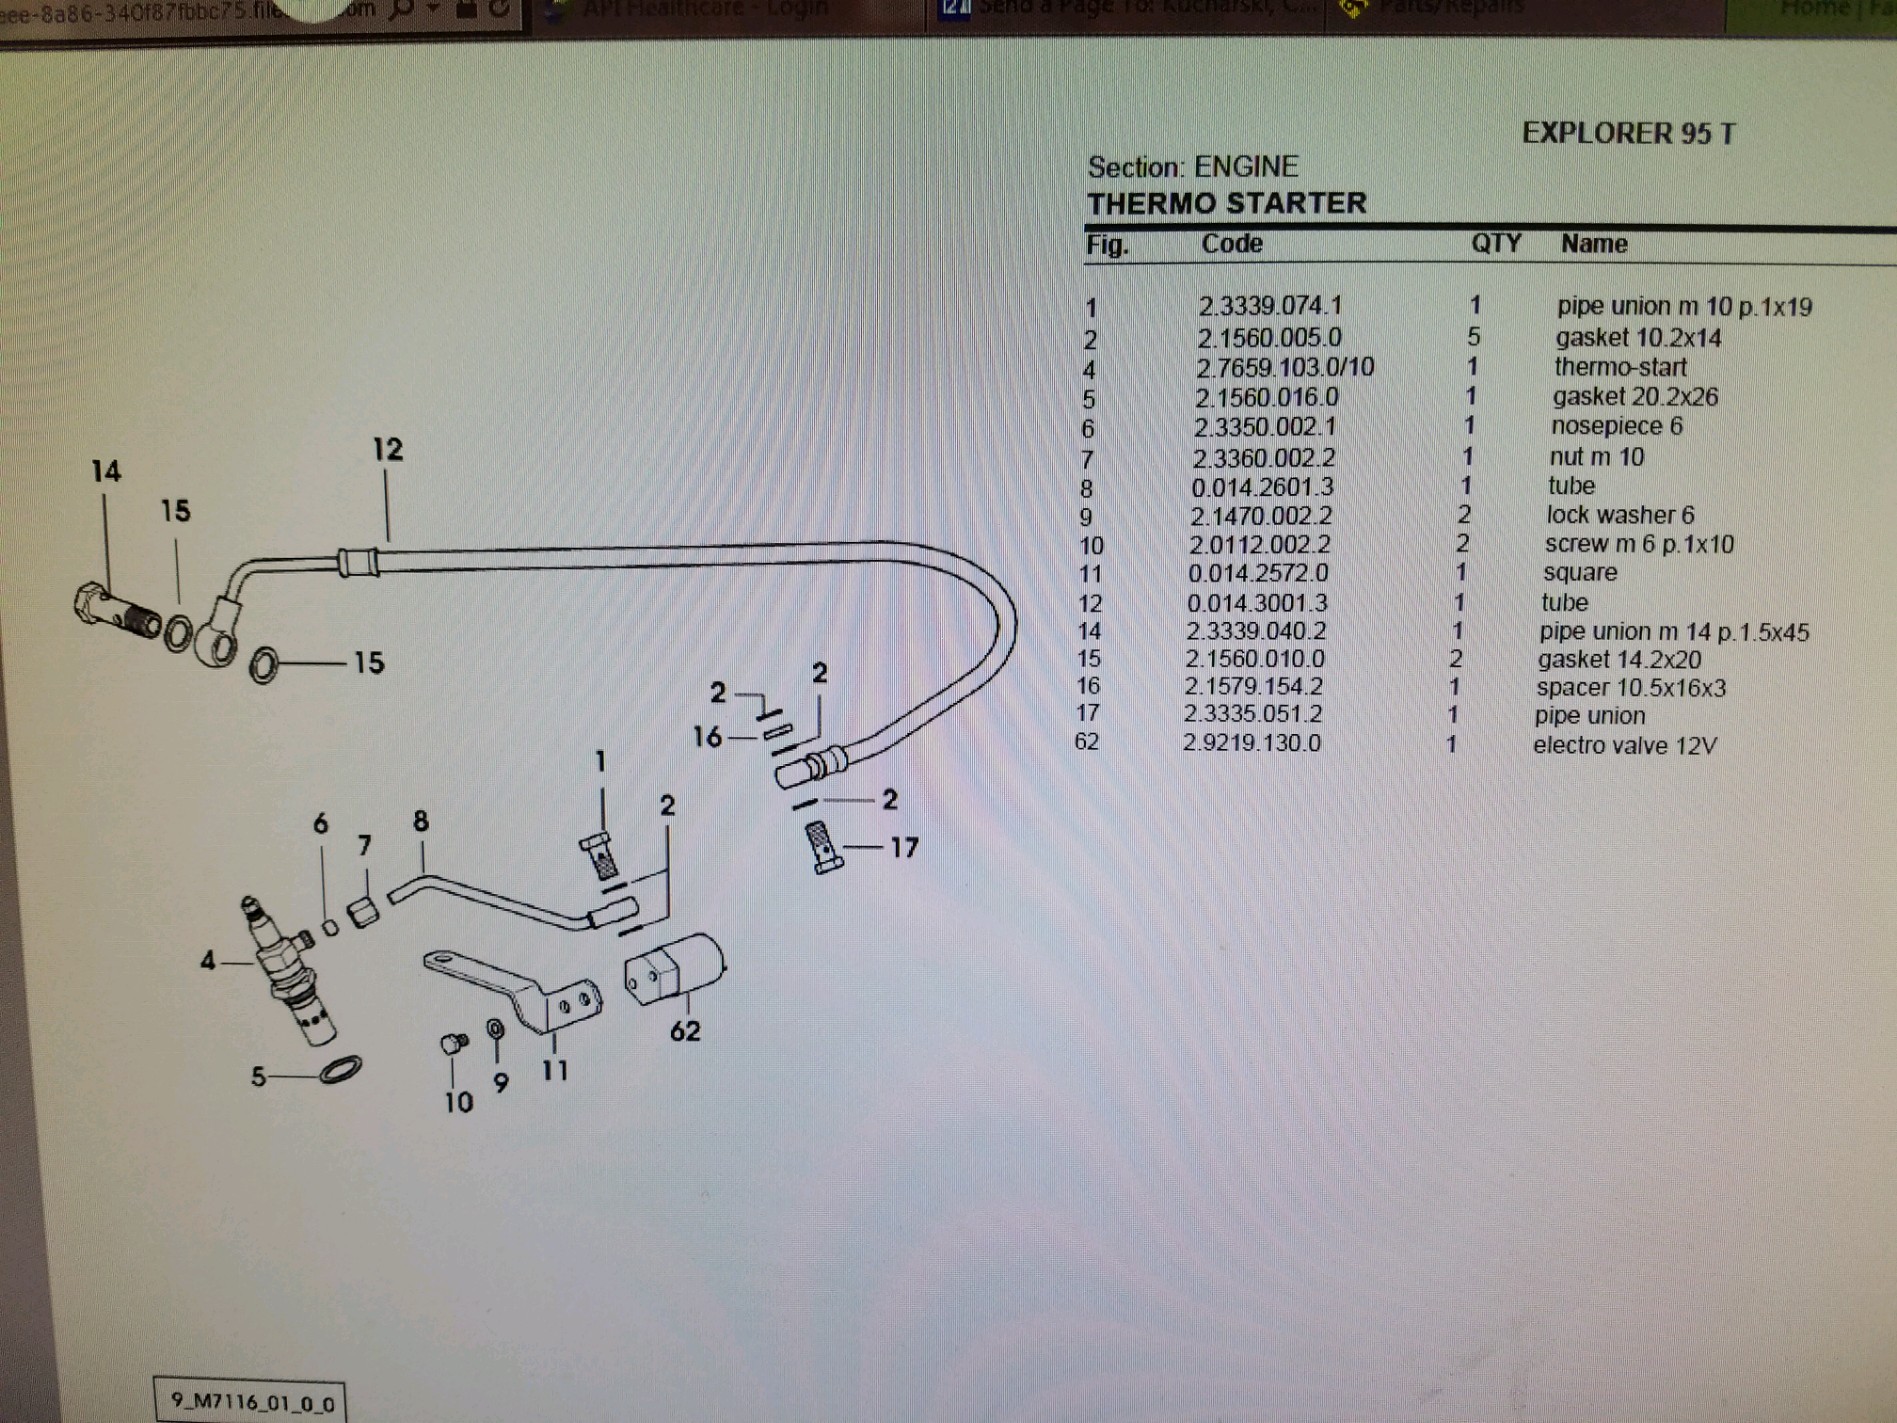 thermo-start issues - TractorByNet  Ford 555b Wiring Diagram Site Www.tractorbynet.com    TractorByNet